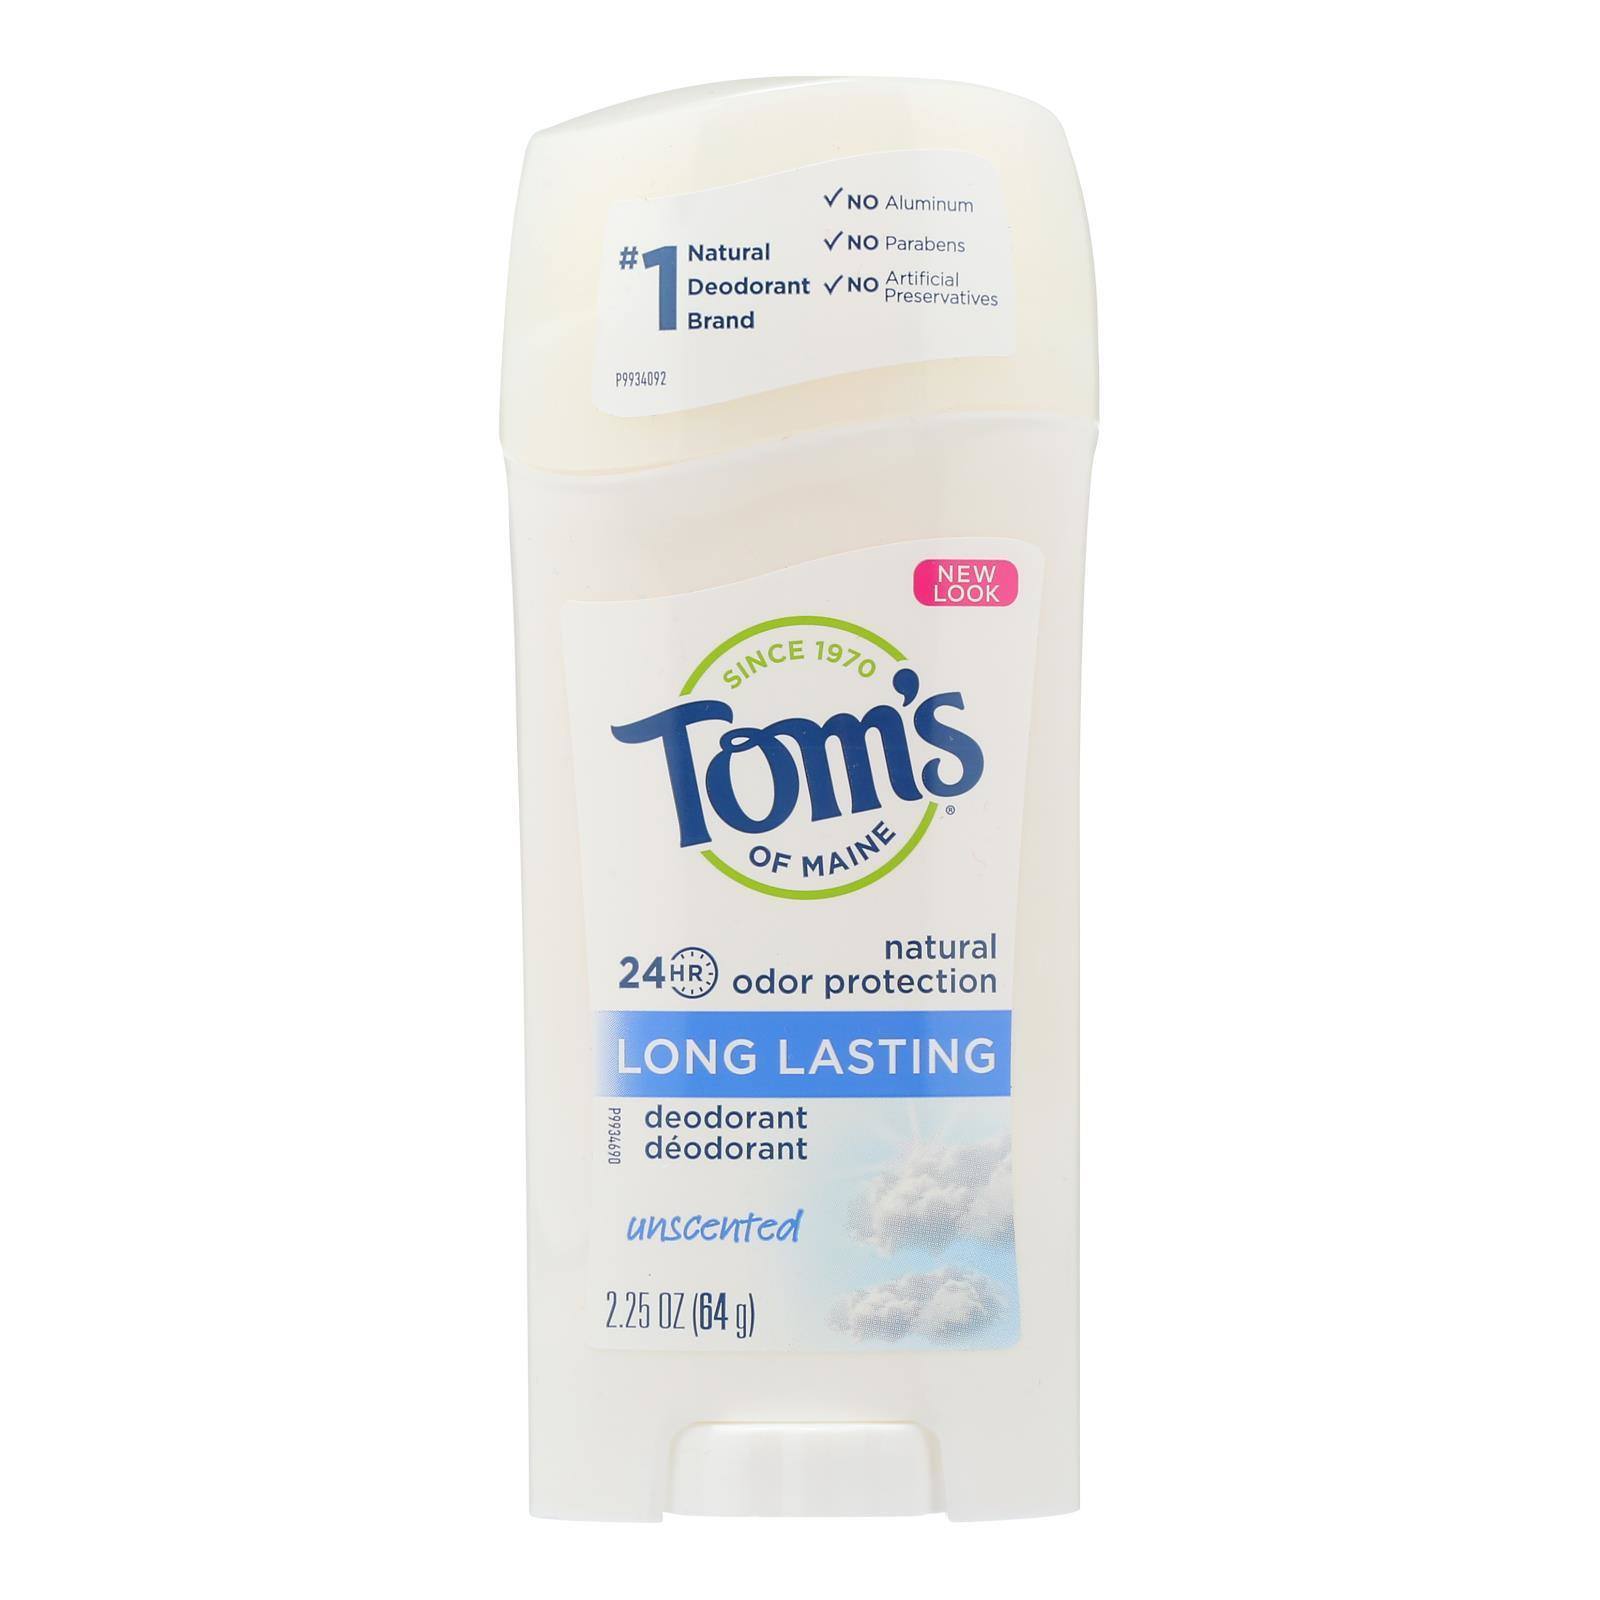 Tom's of Maine Natural Long-Lasting Deodorant Stick Unscented - 2.25 oz Each - Case of 6(D0102HXXJCG.)